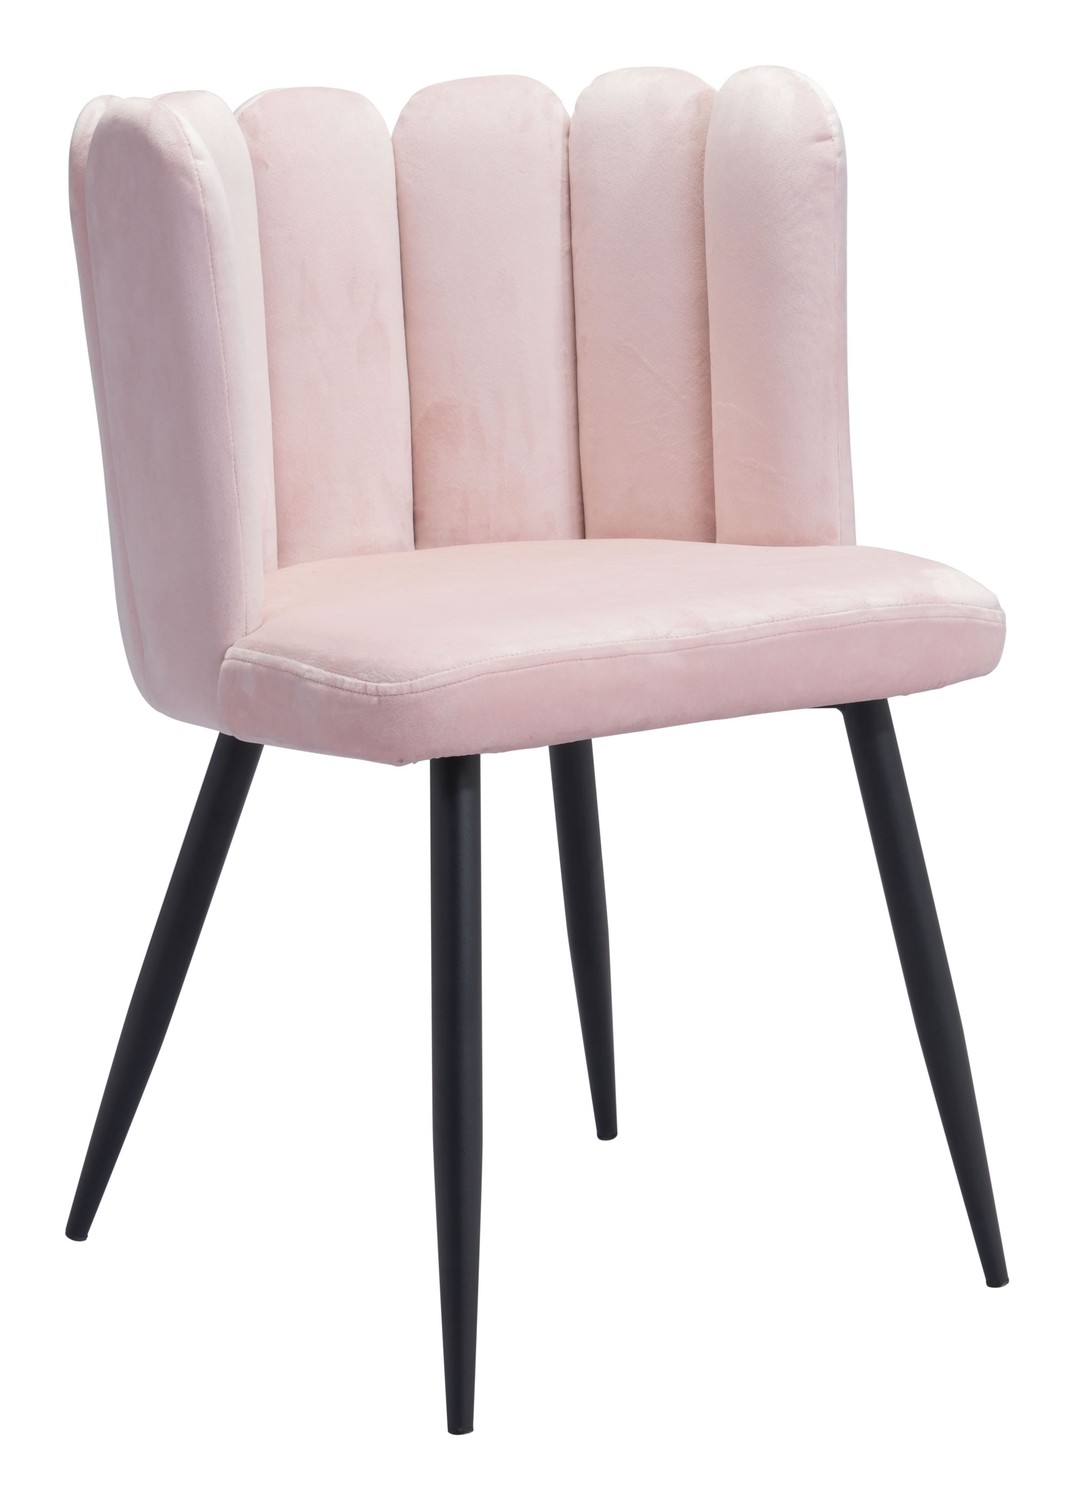 22" x 22" x 31.5" Pink Velvet Steel and Plywood Chair Set of 2